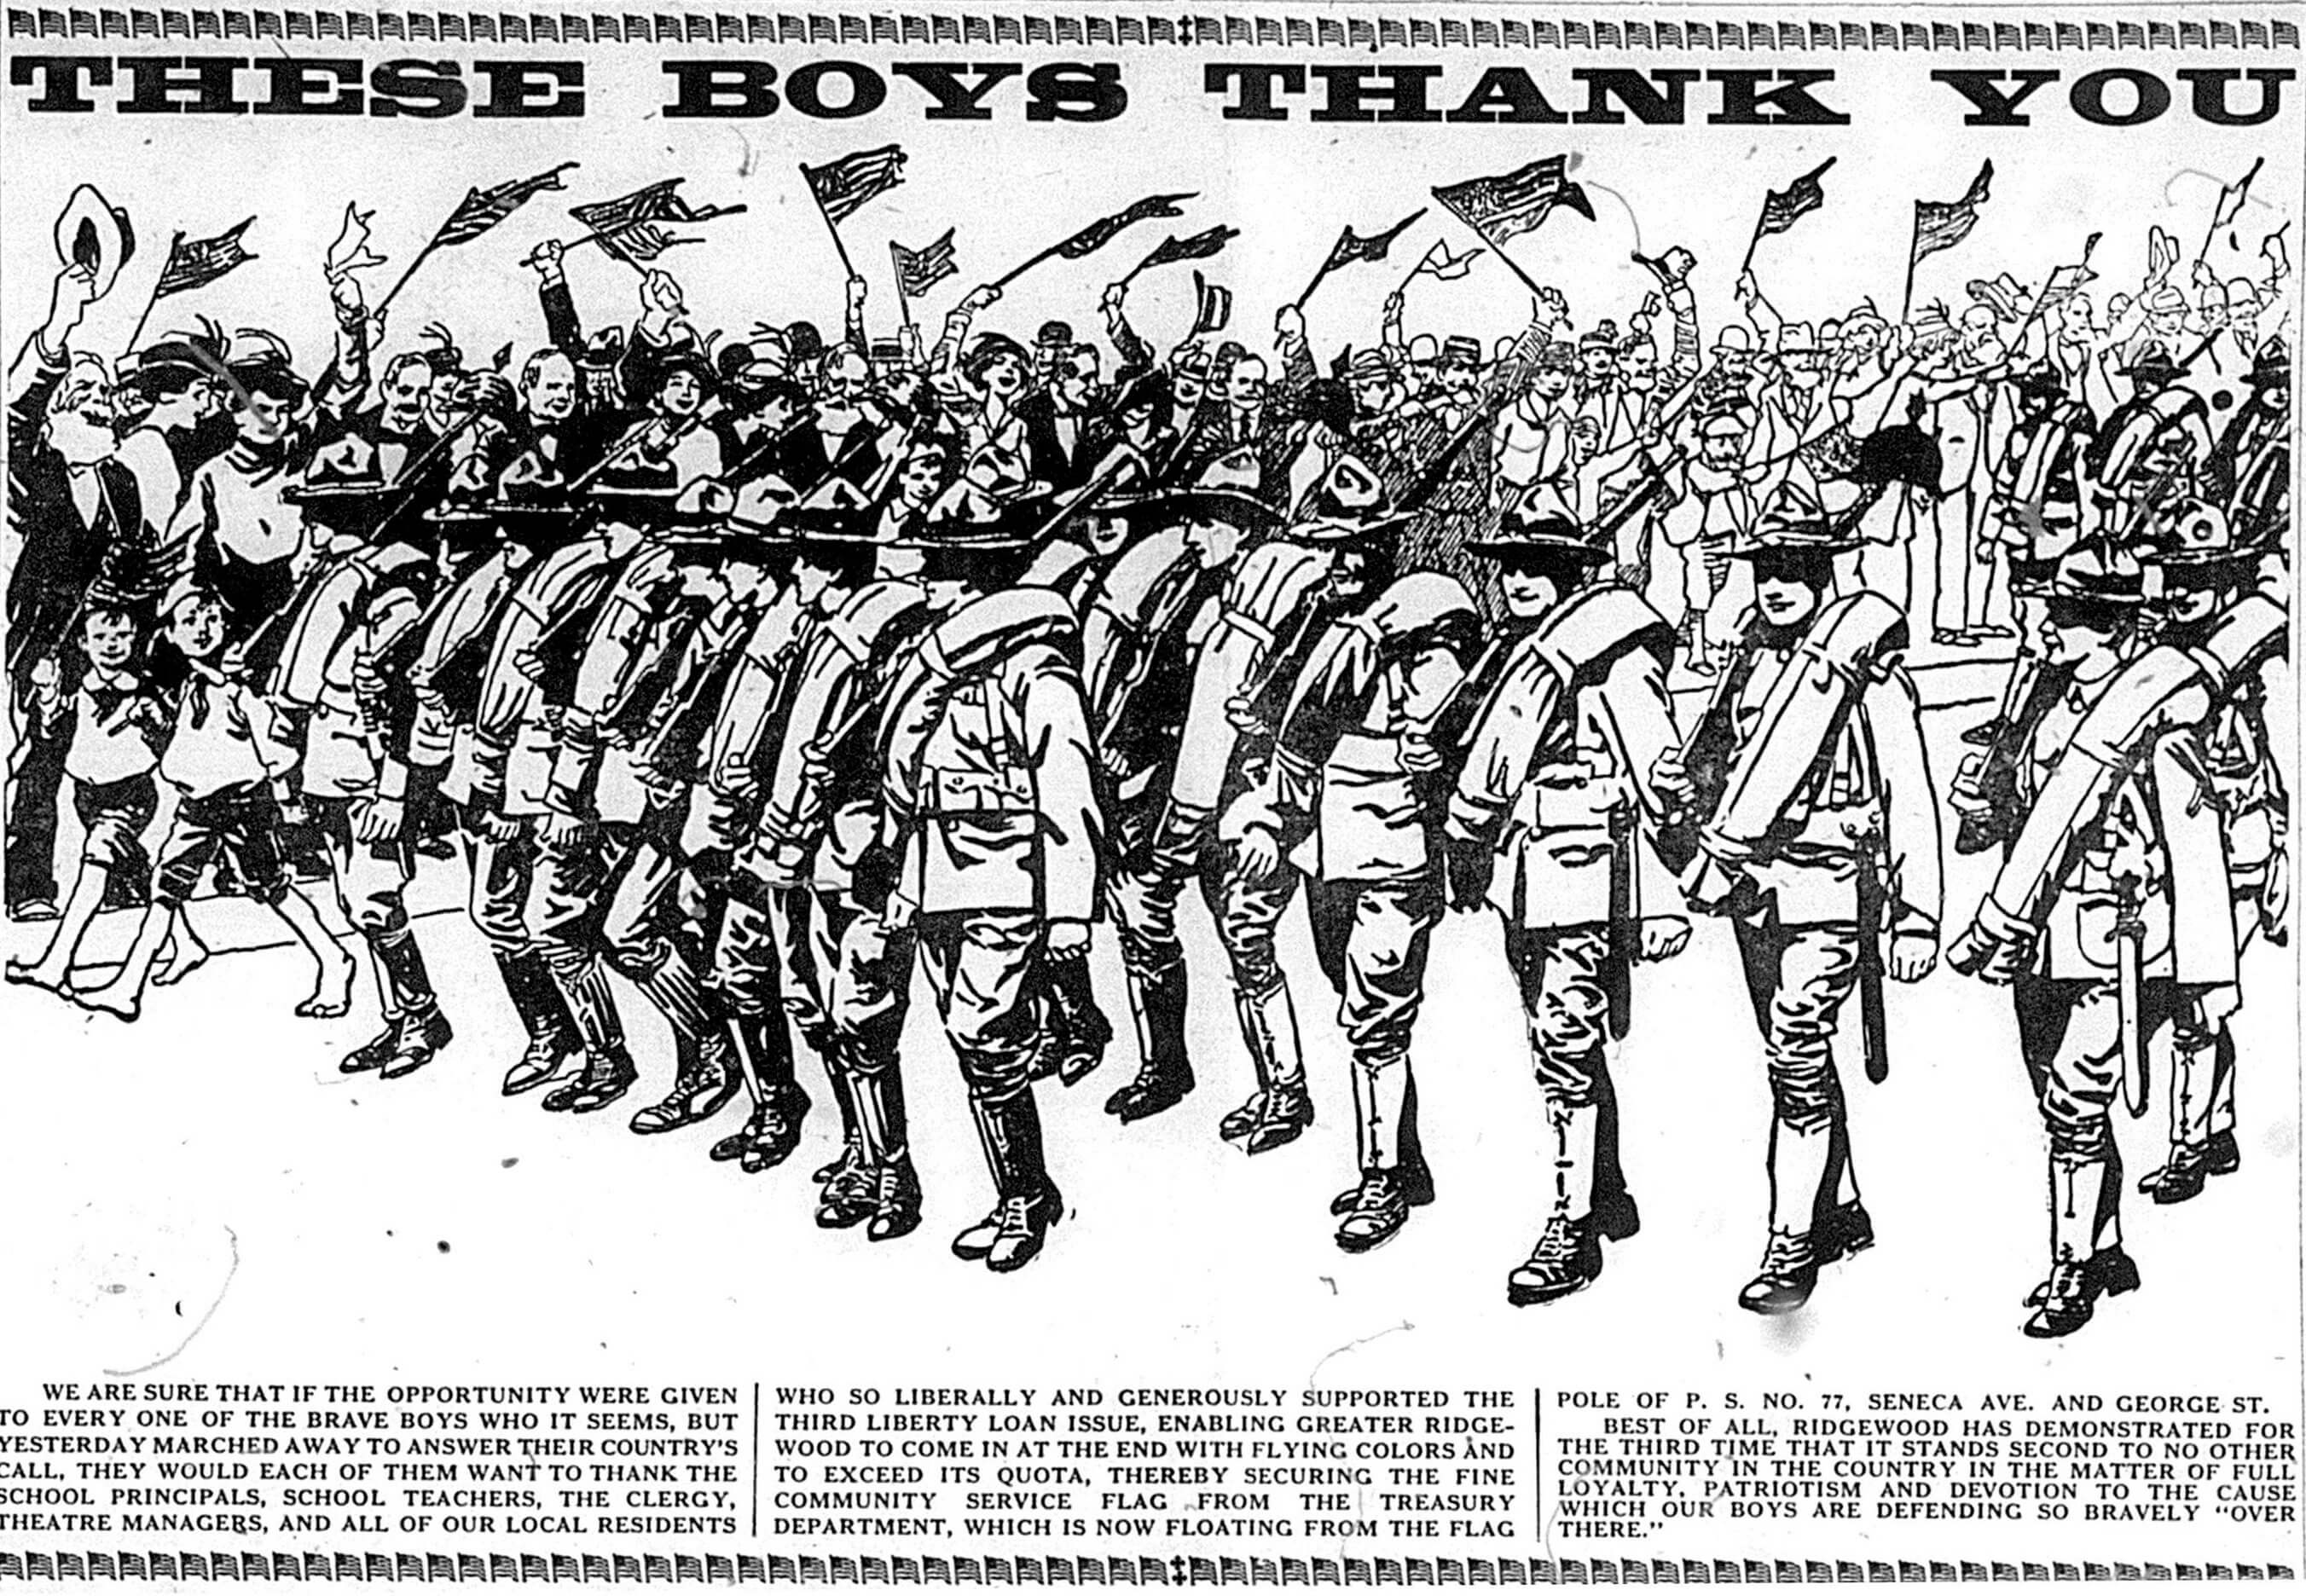 This tribute to the World War I soldiers ran in a May 1918 issue of the Ridgewood Times